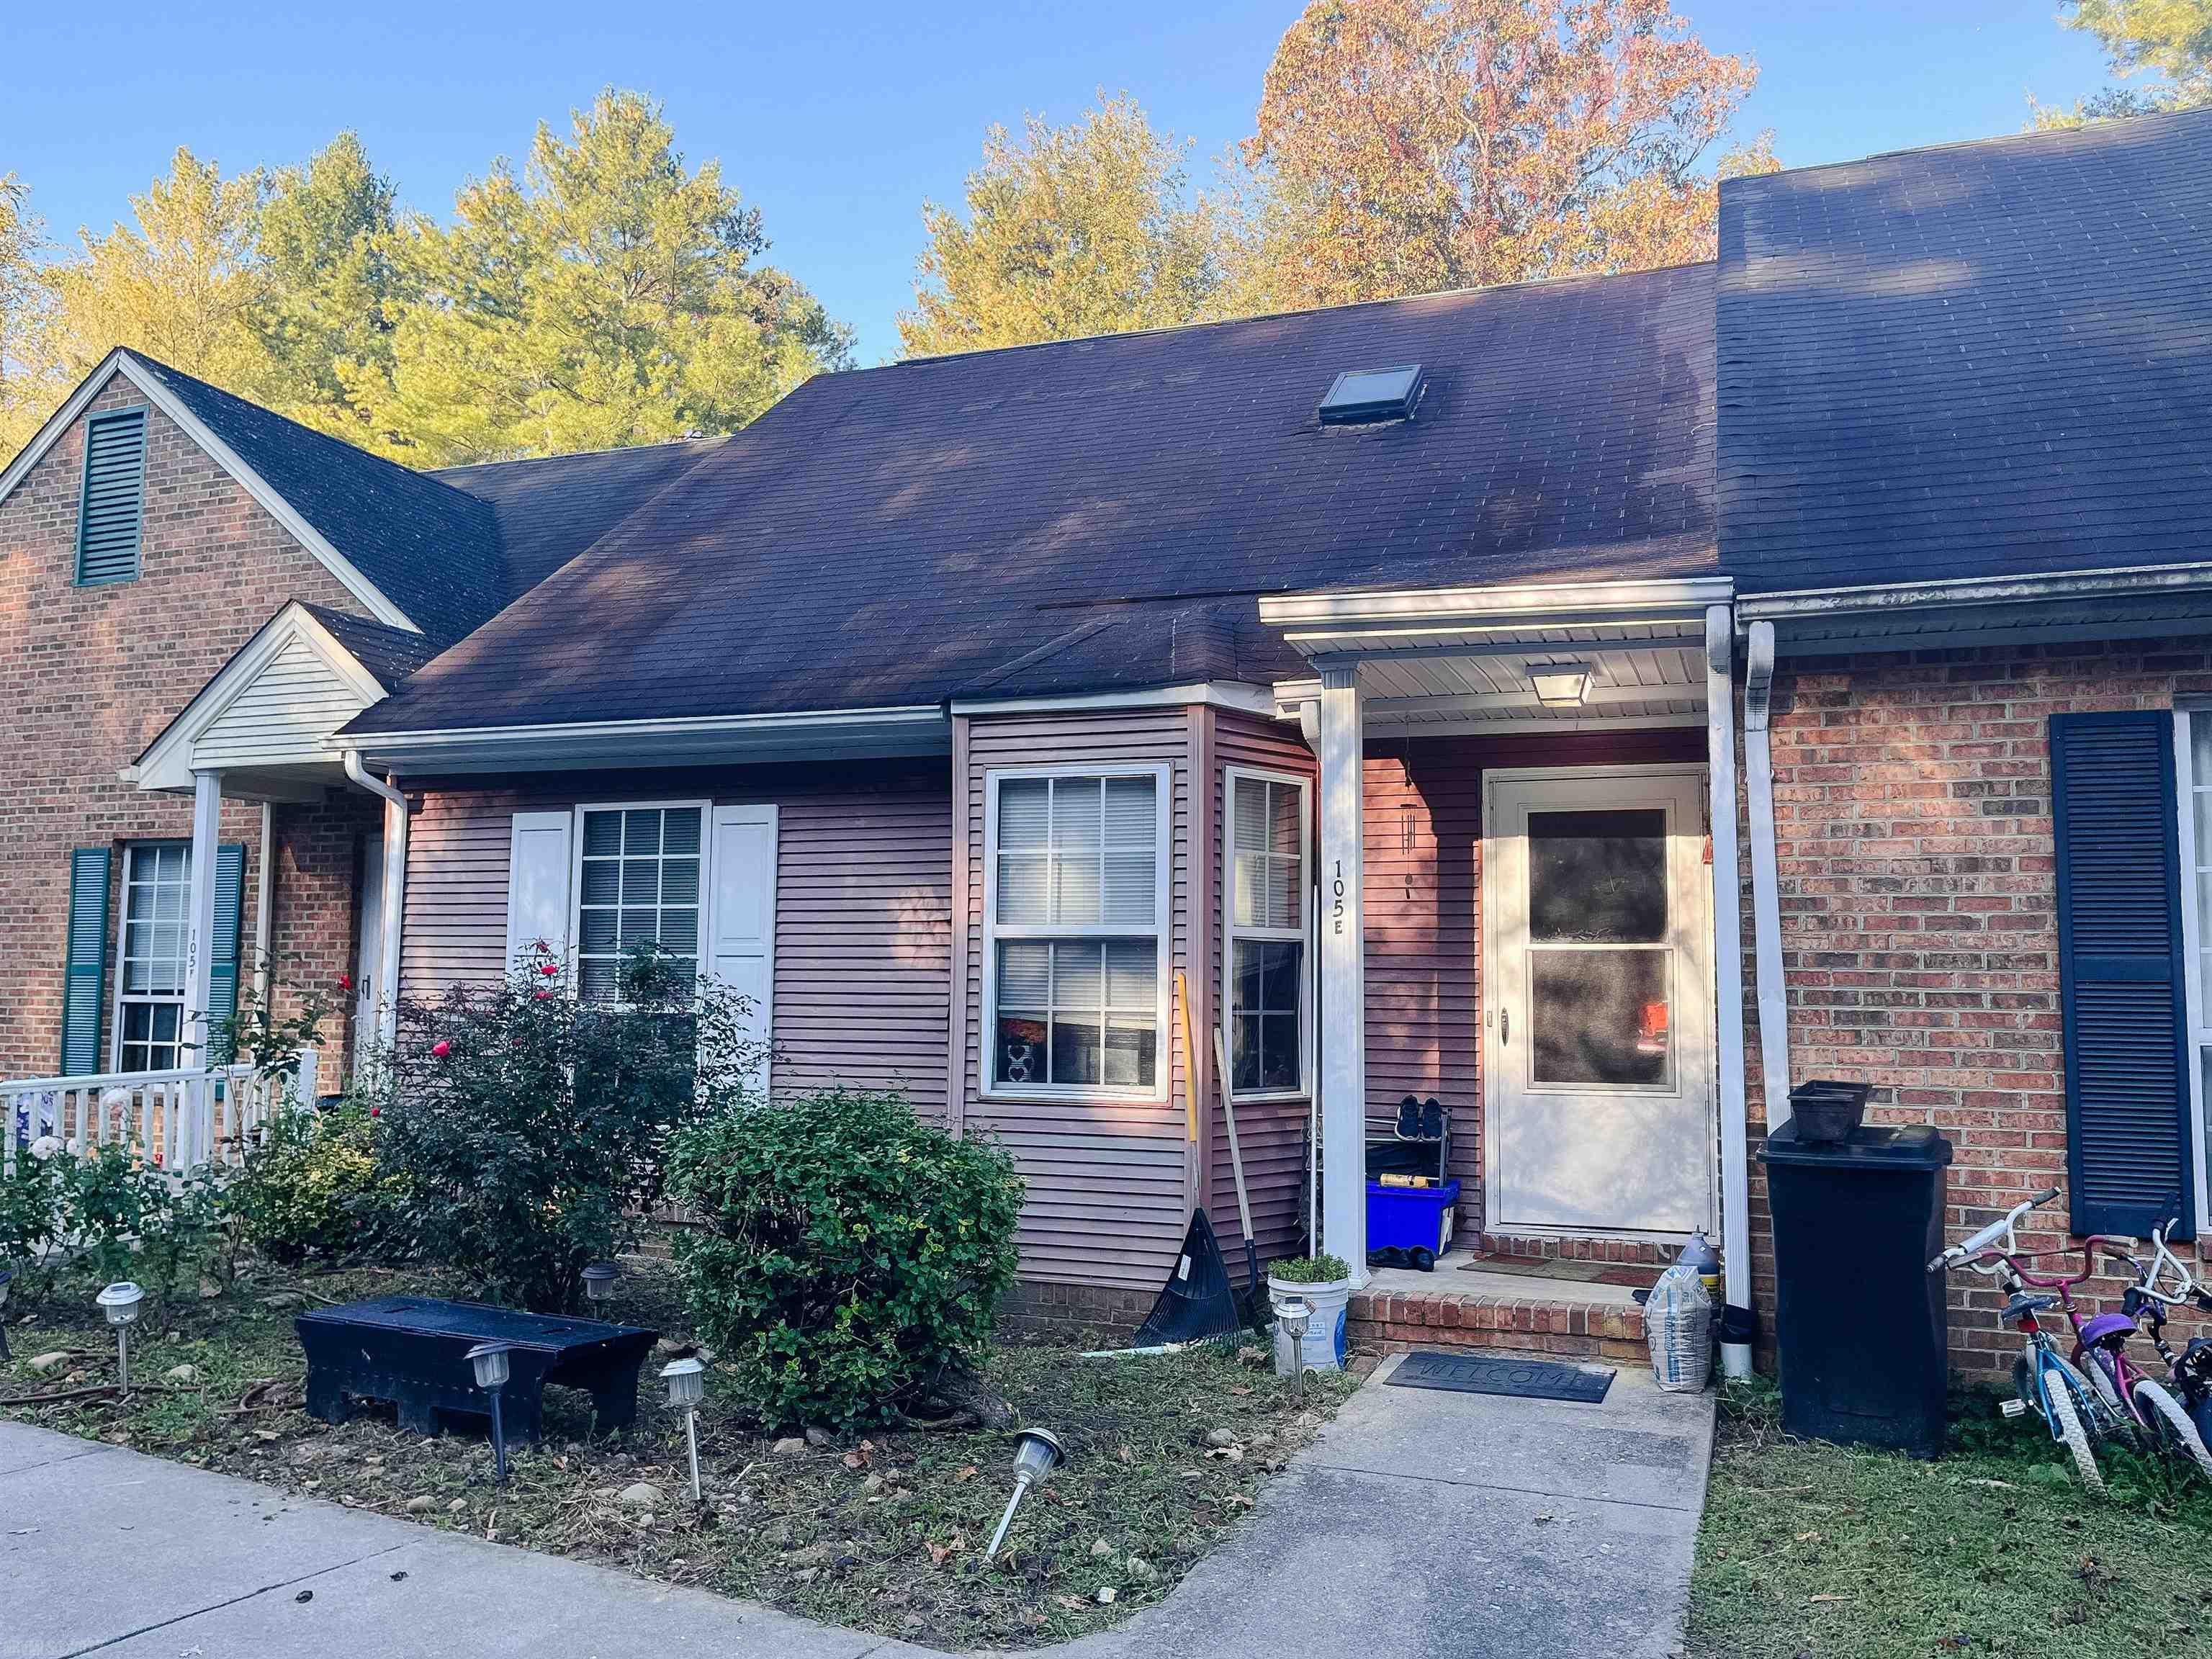 Calling all investors!  105E Lovely Mount Drive is one of five, cash flowing townhomes being sold together in the conveniently located Chinquapin community off of Rock Road in Radford.  This 3 bed, 2 bath townhome has some updated appliances and flooring.  Leased through 10/31/23 at $950/month.  Take a look at the listings for units 101B, 105A, 105B, and 103F that are being sold together with this townhome.